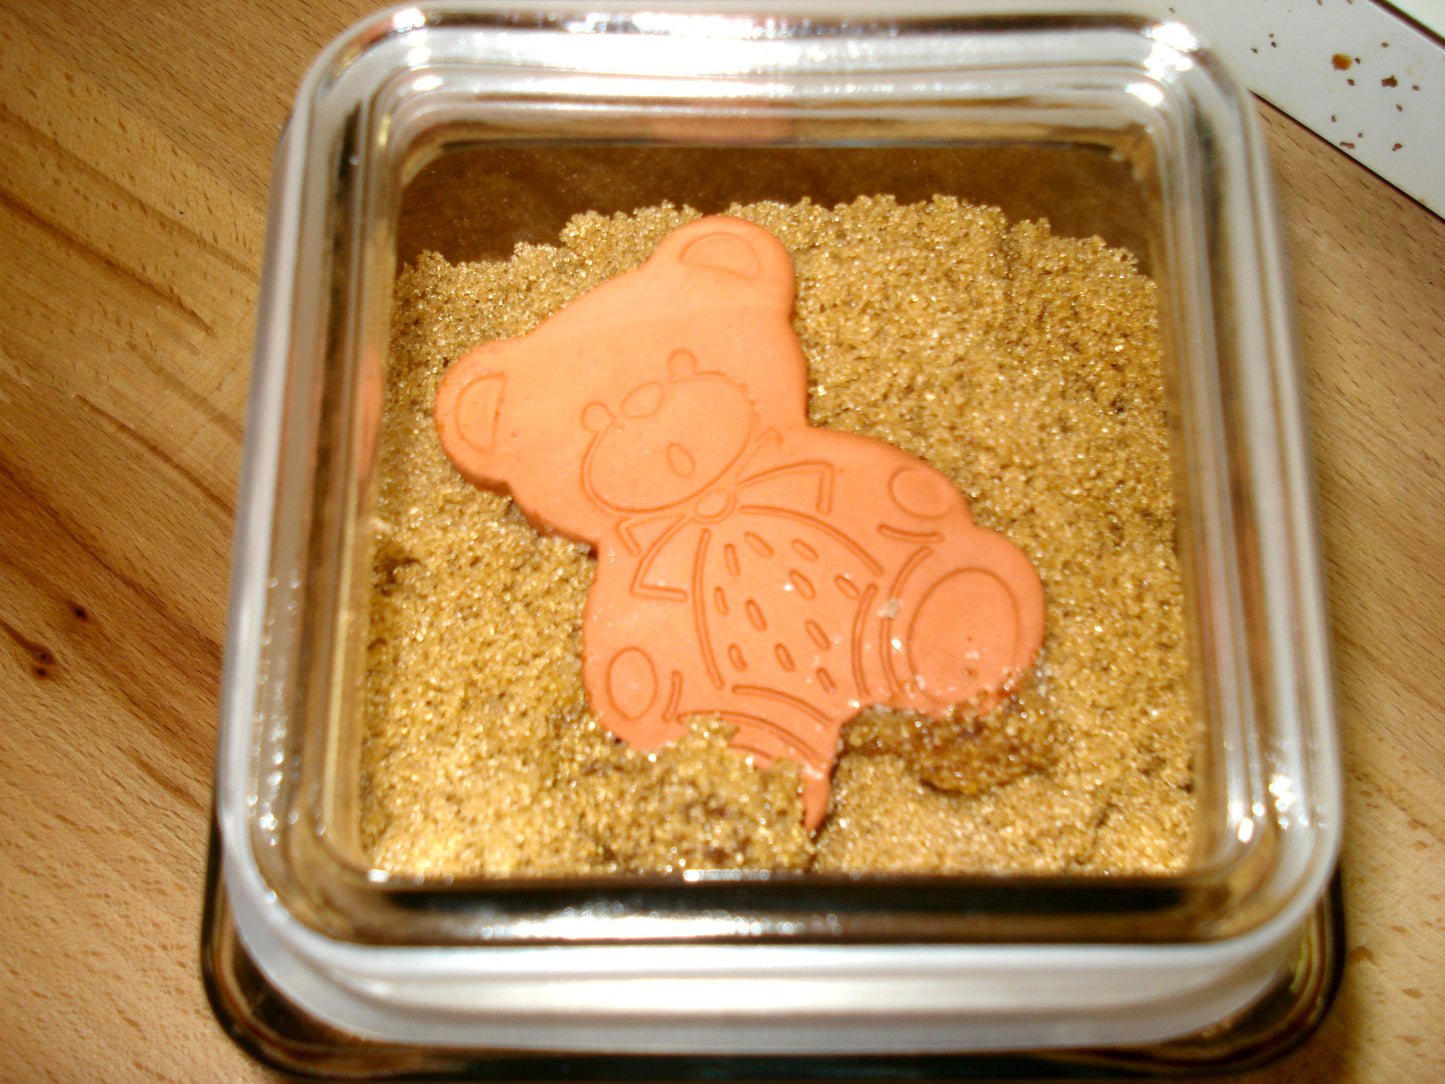 The Beary Awesome Cookie & Brown Sugar Saver